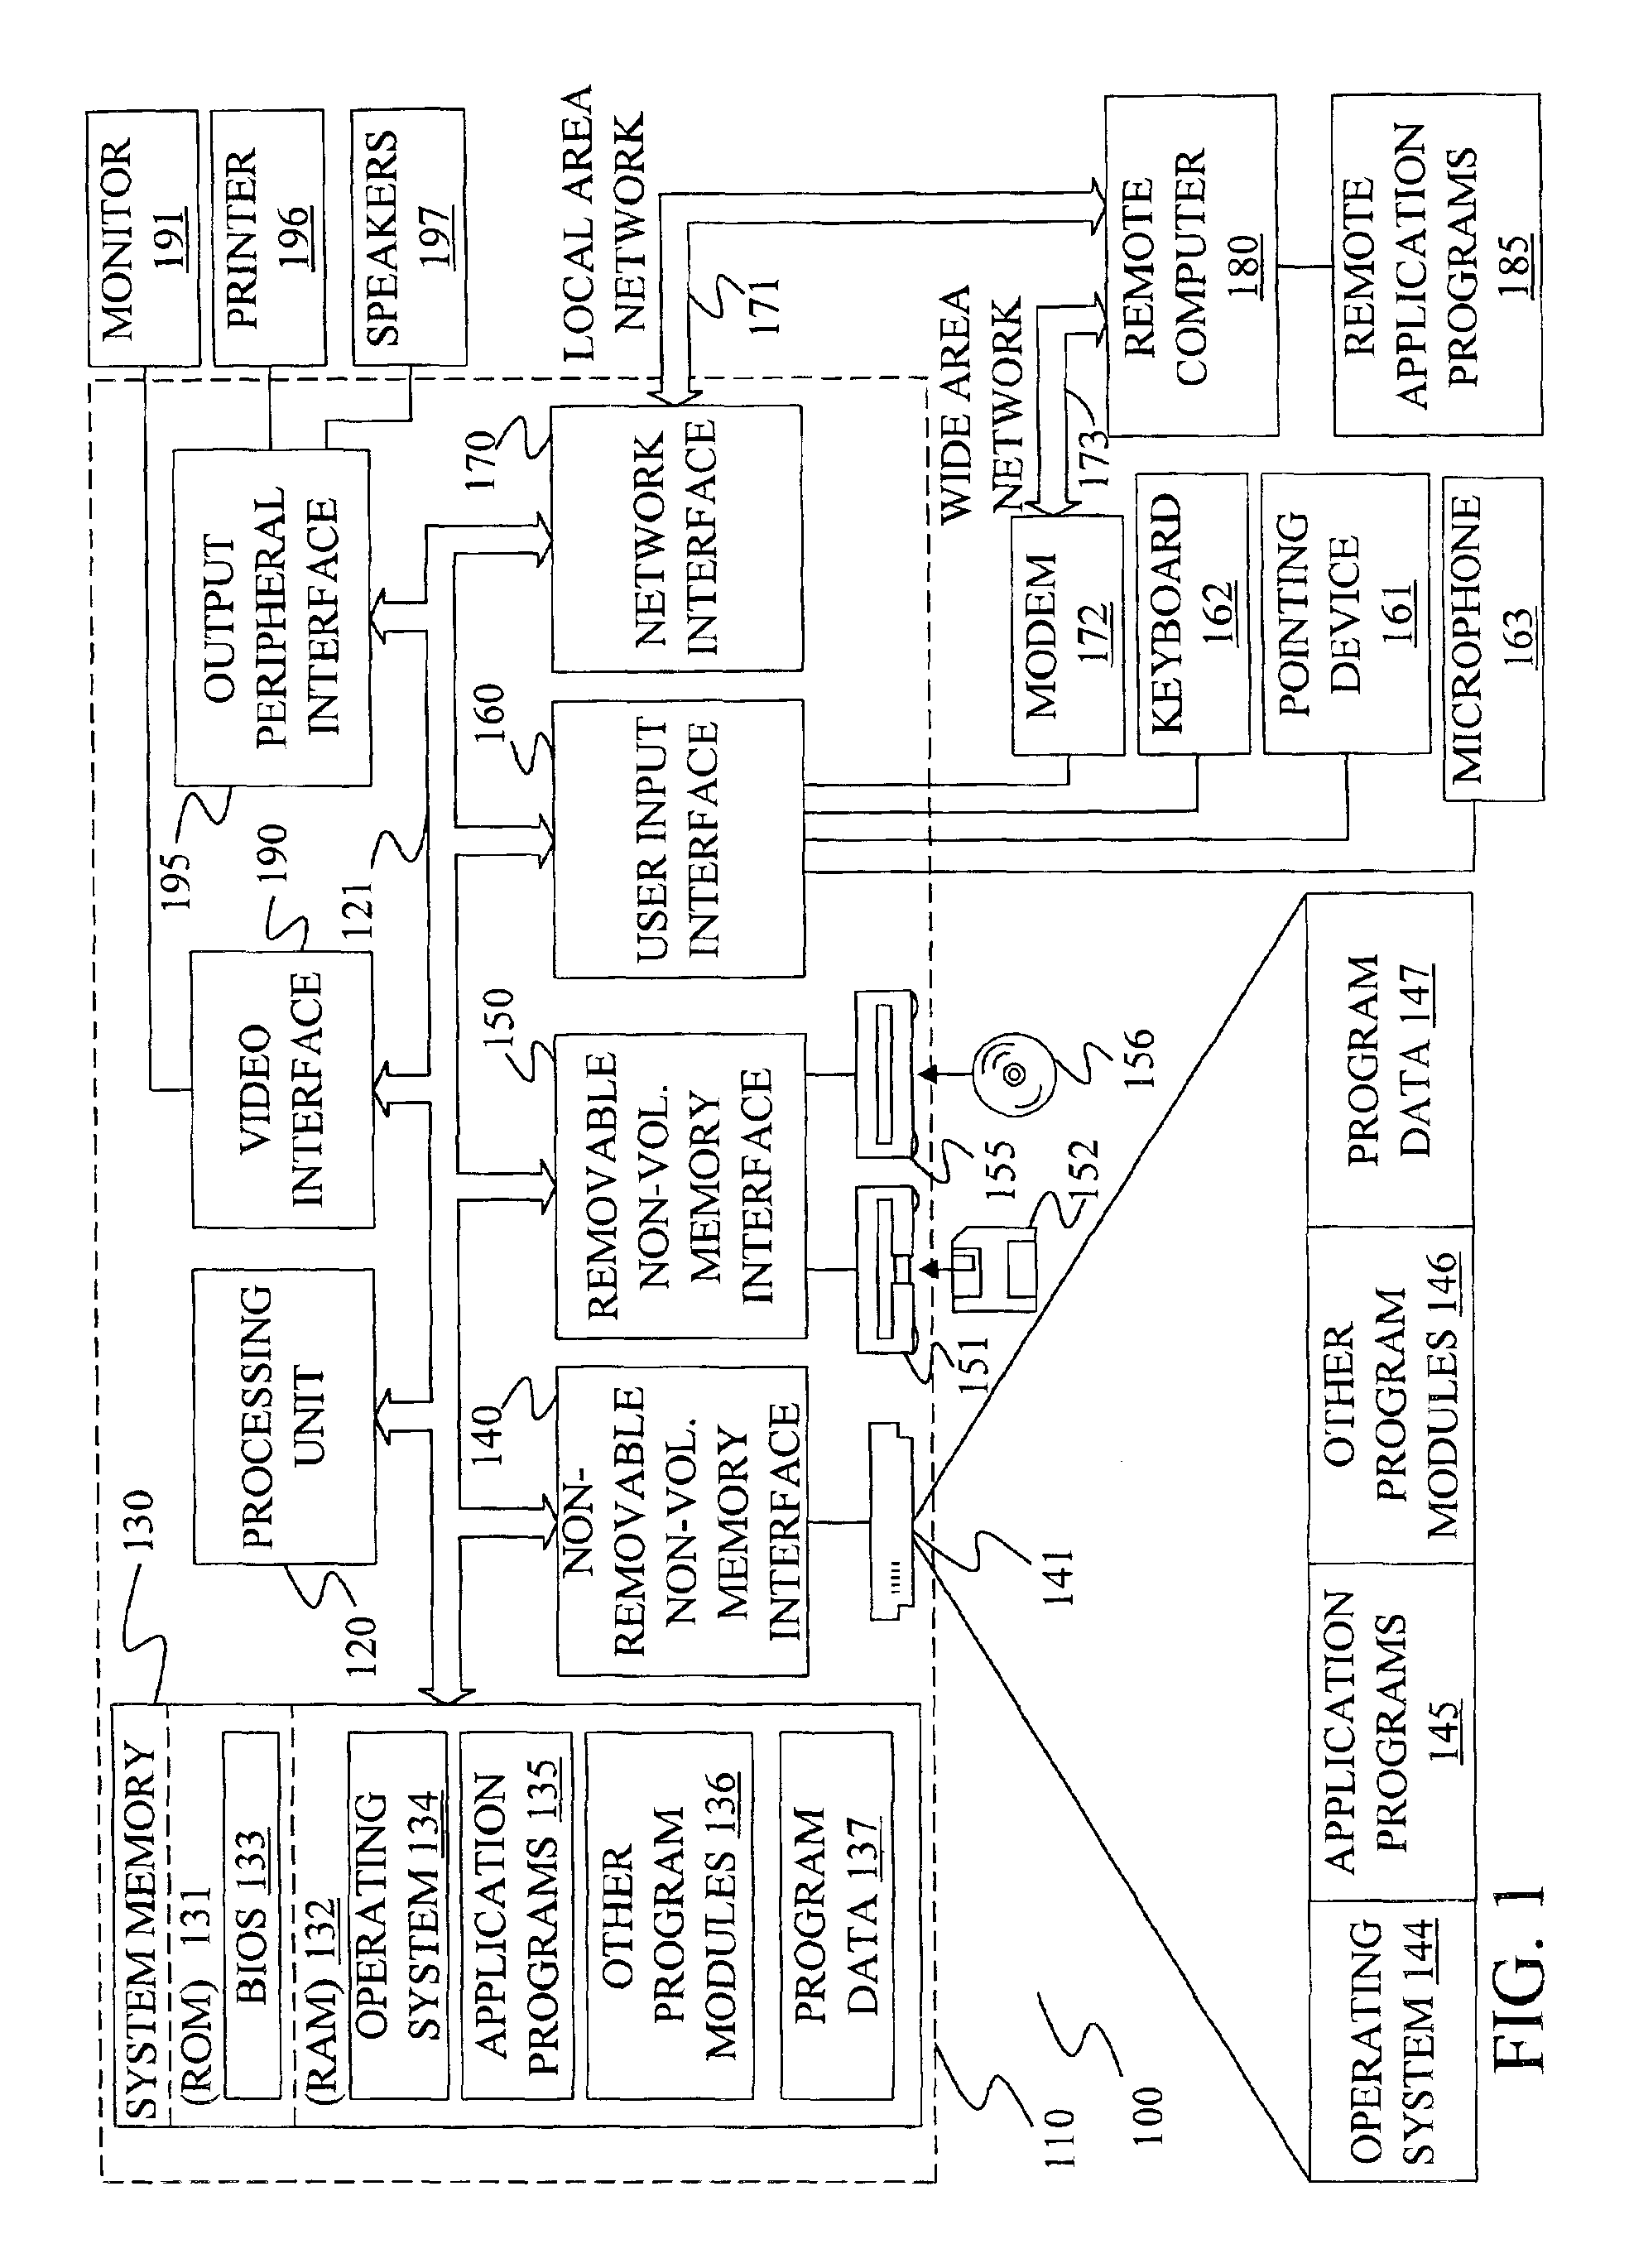 Method and system for frame alignment and unsupervised adaptation of acoustic models